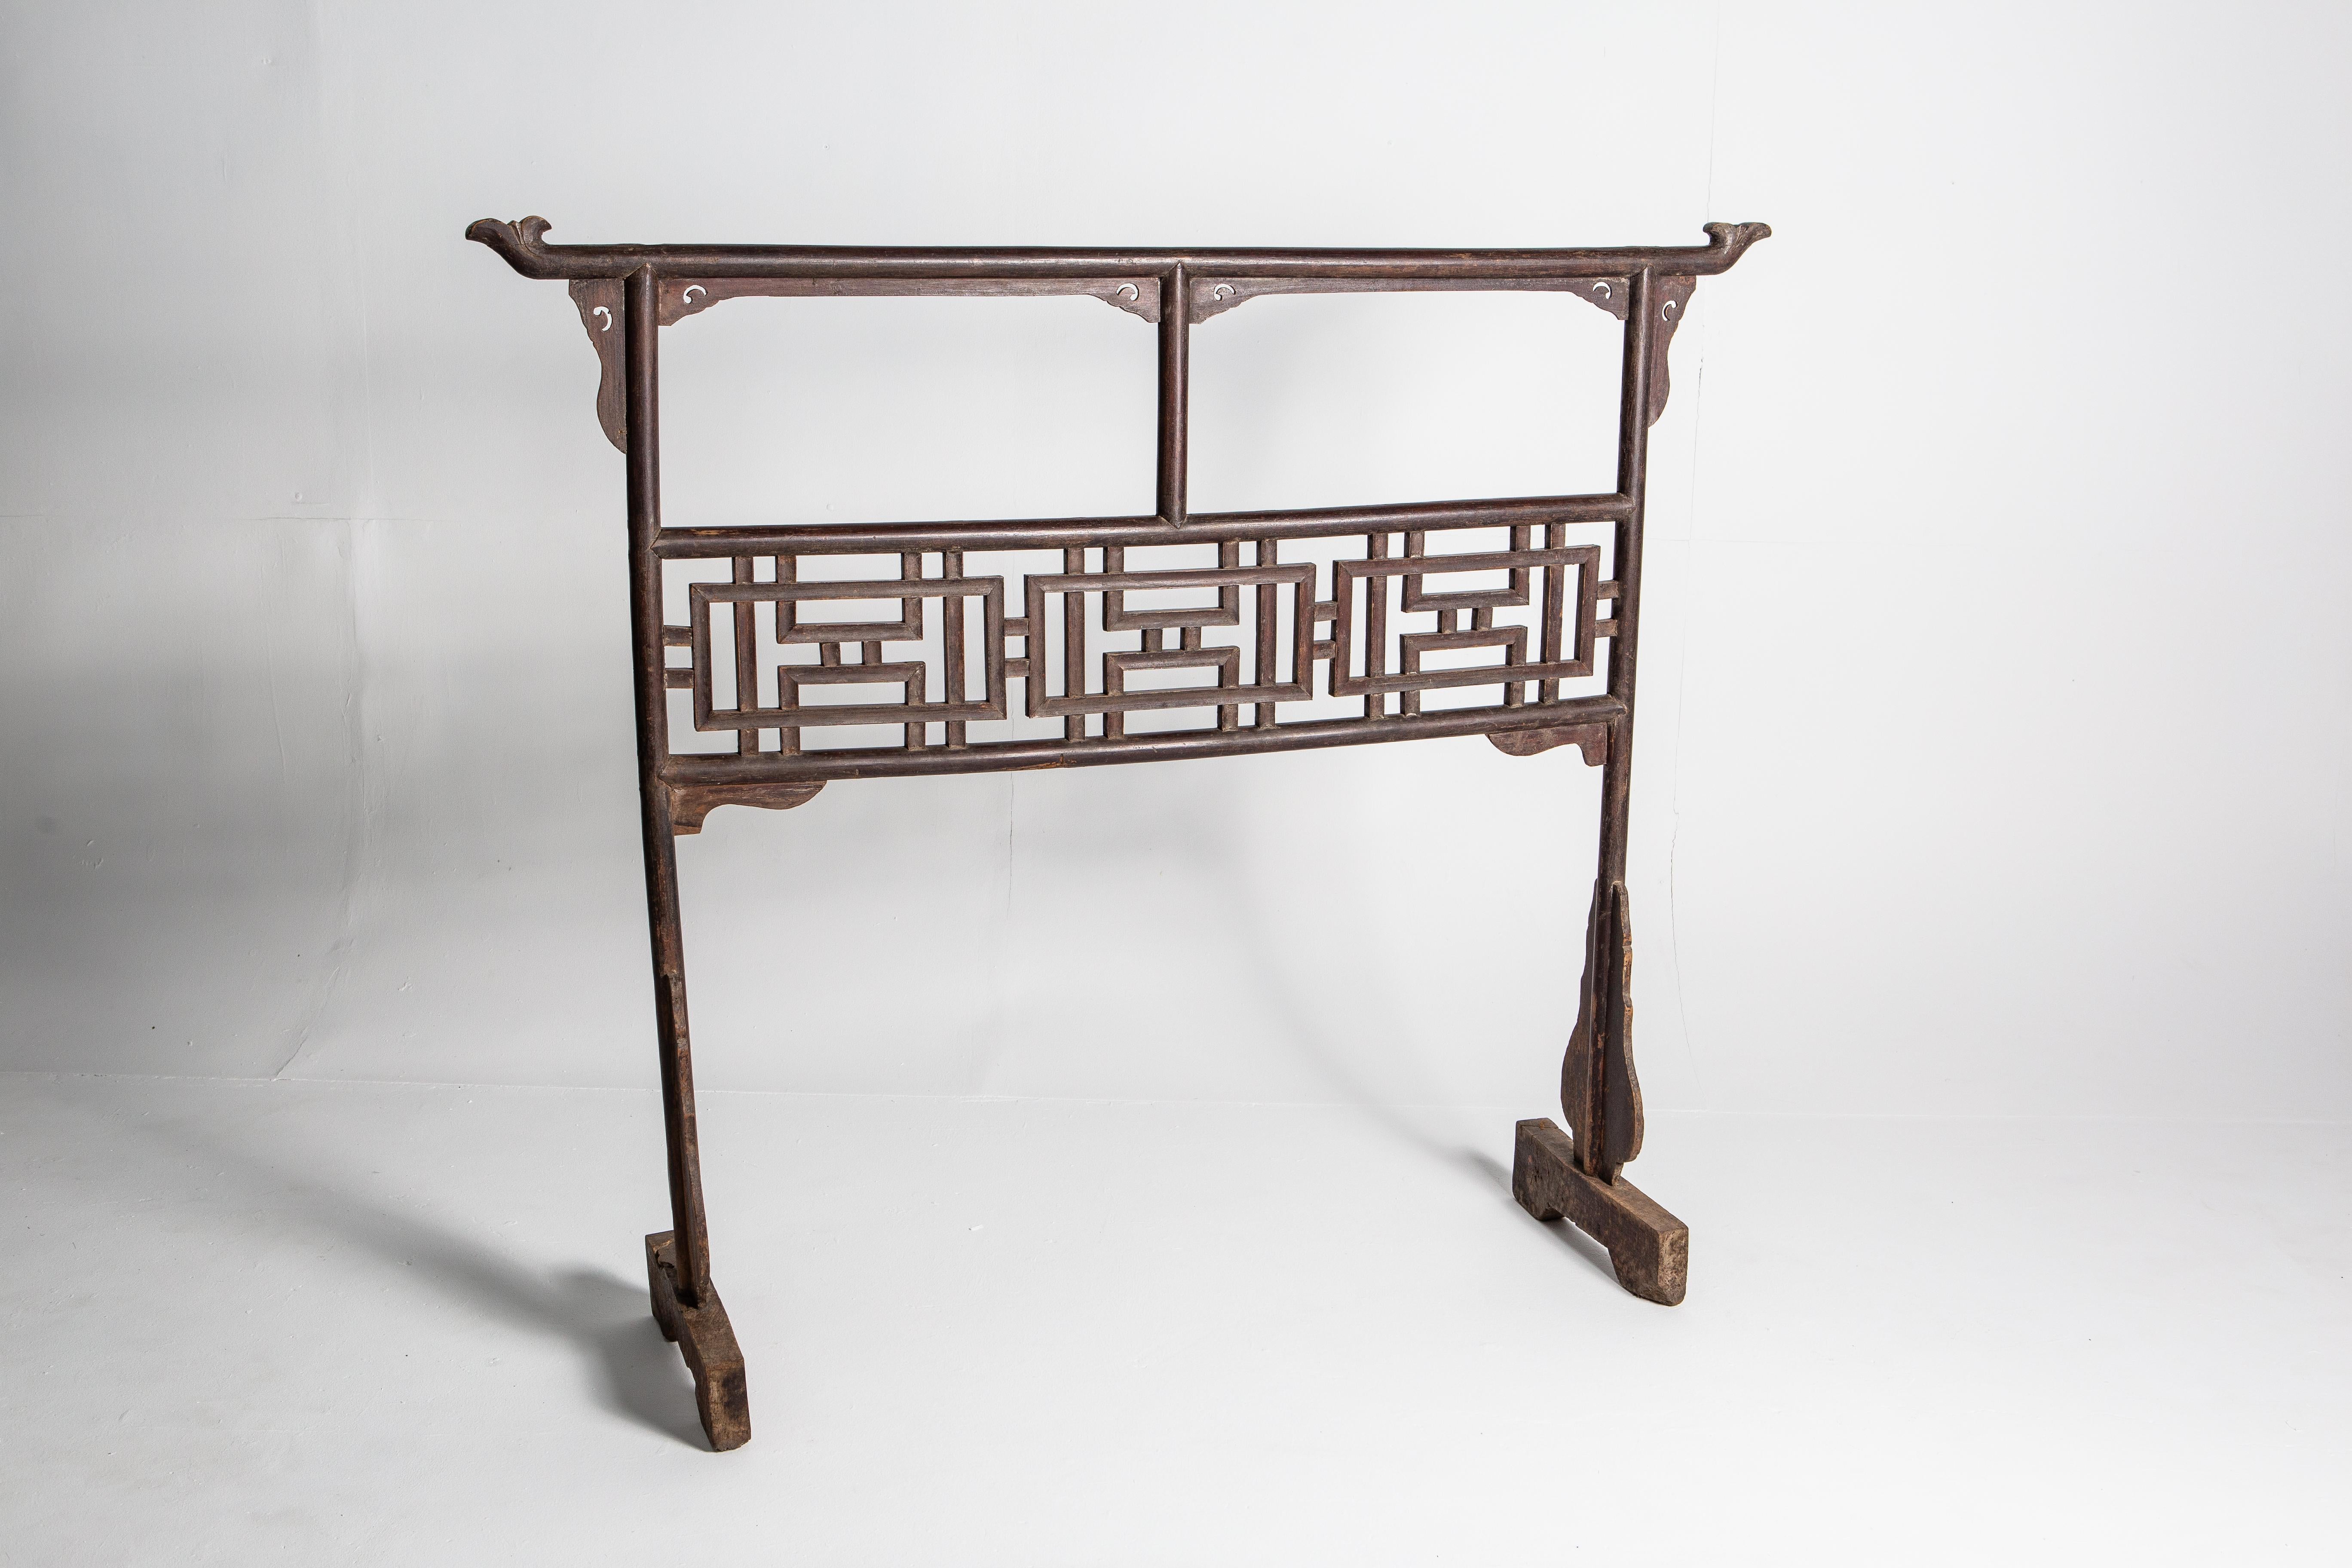 An interesting wooden garment rack of generous proportions. Ancient stand-up hangers like these were one of the most prevalent household accessories because Chinese architectural traditions didn’t provide for closet space. Here, the eye travels from